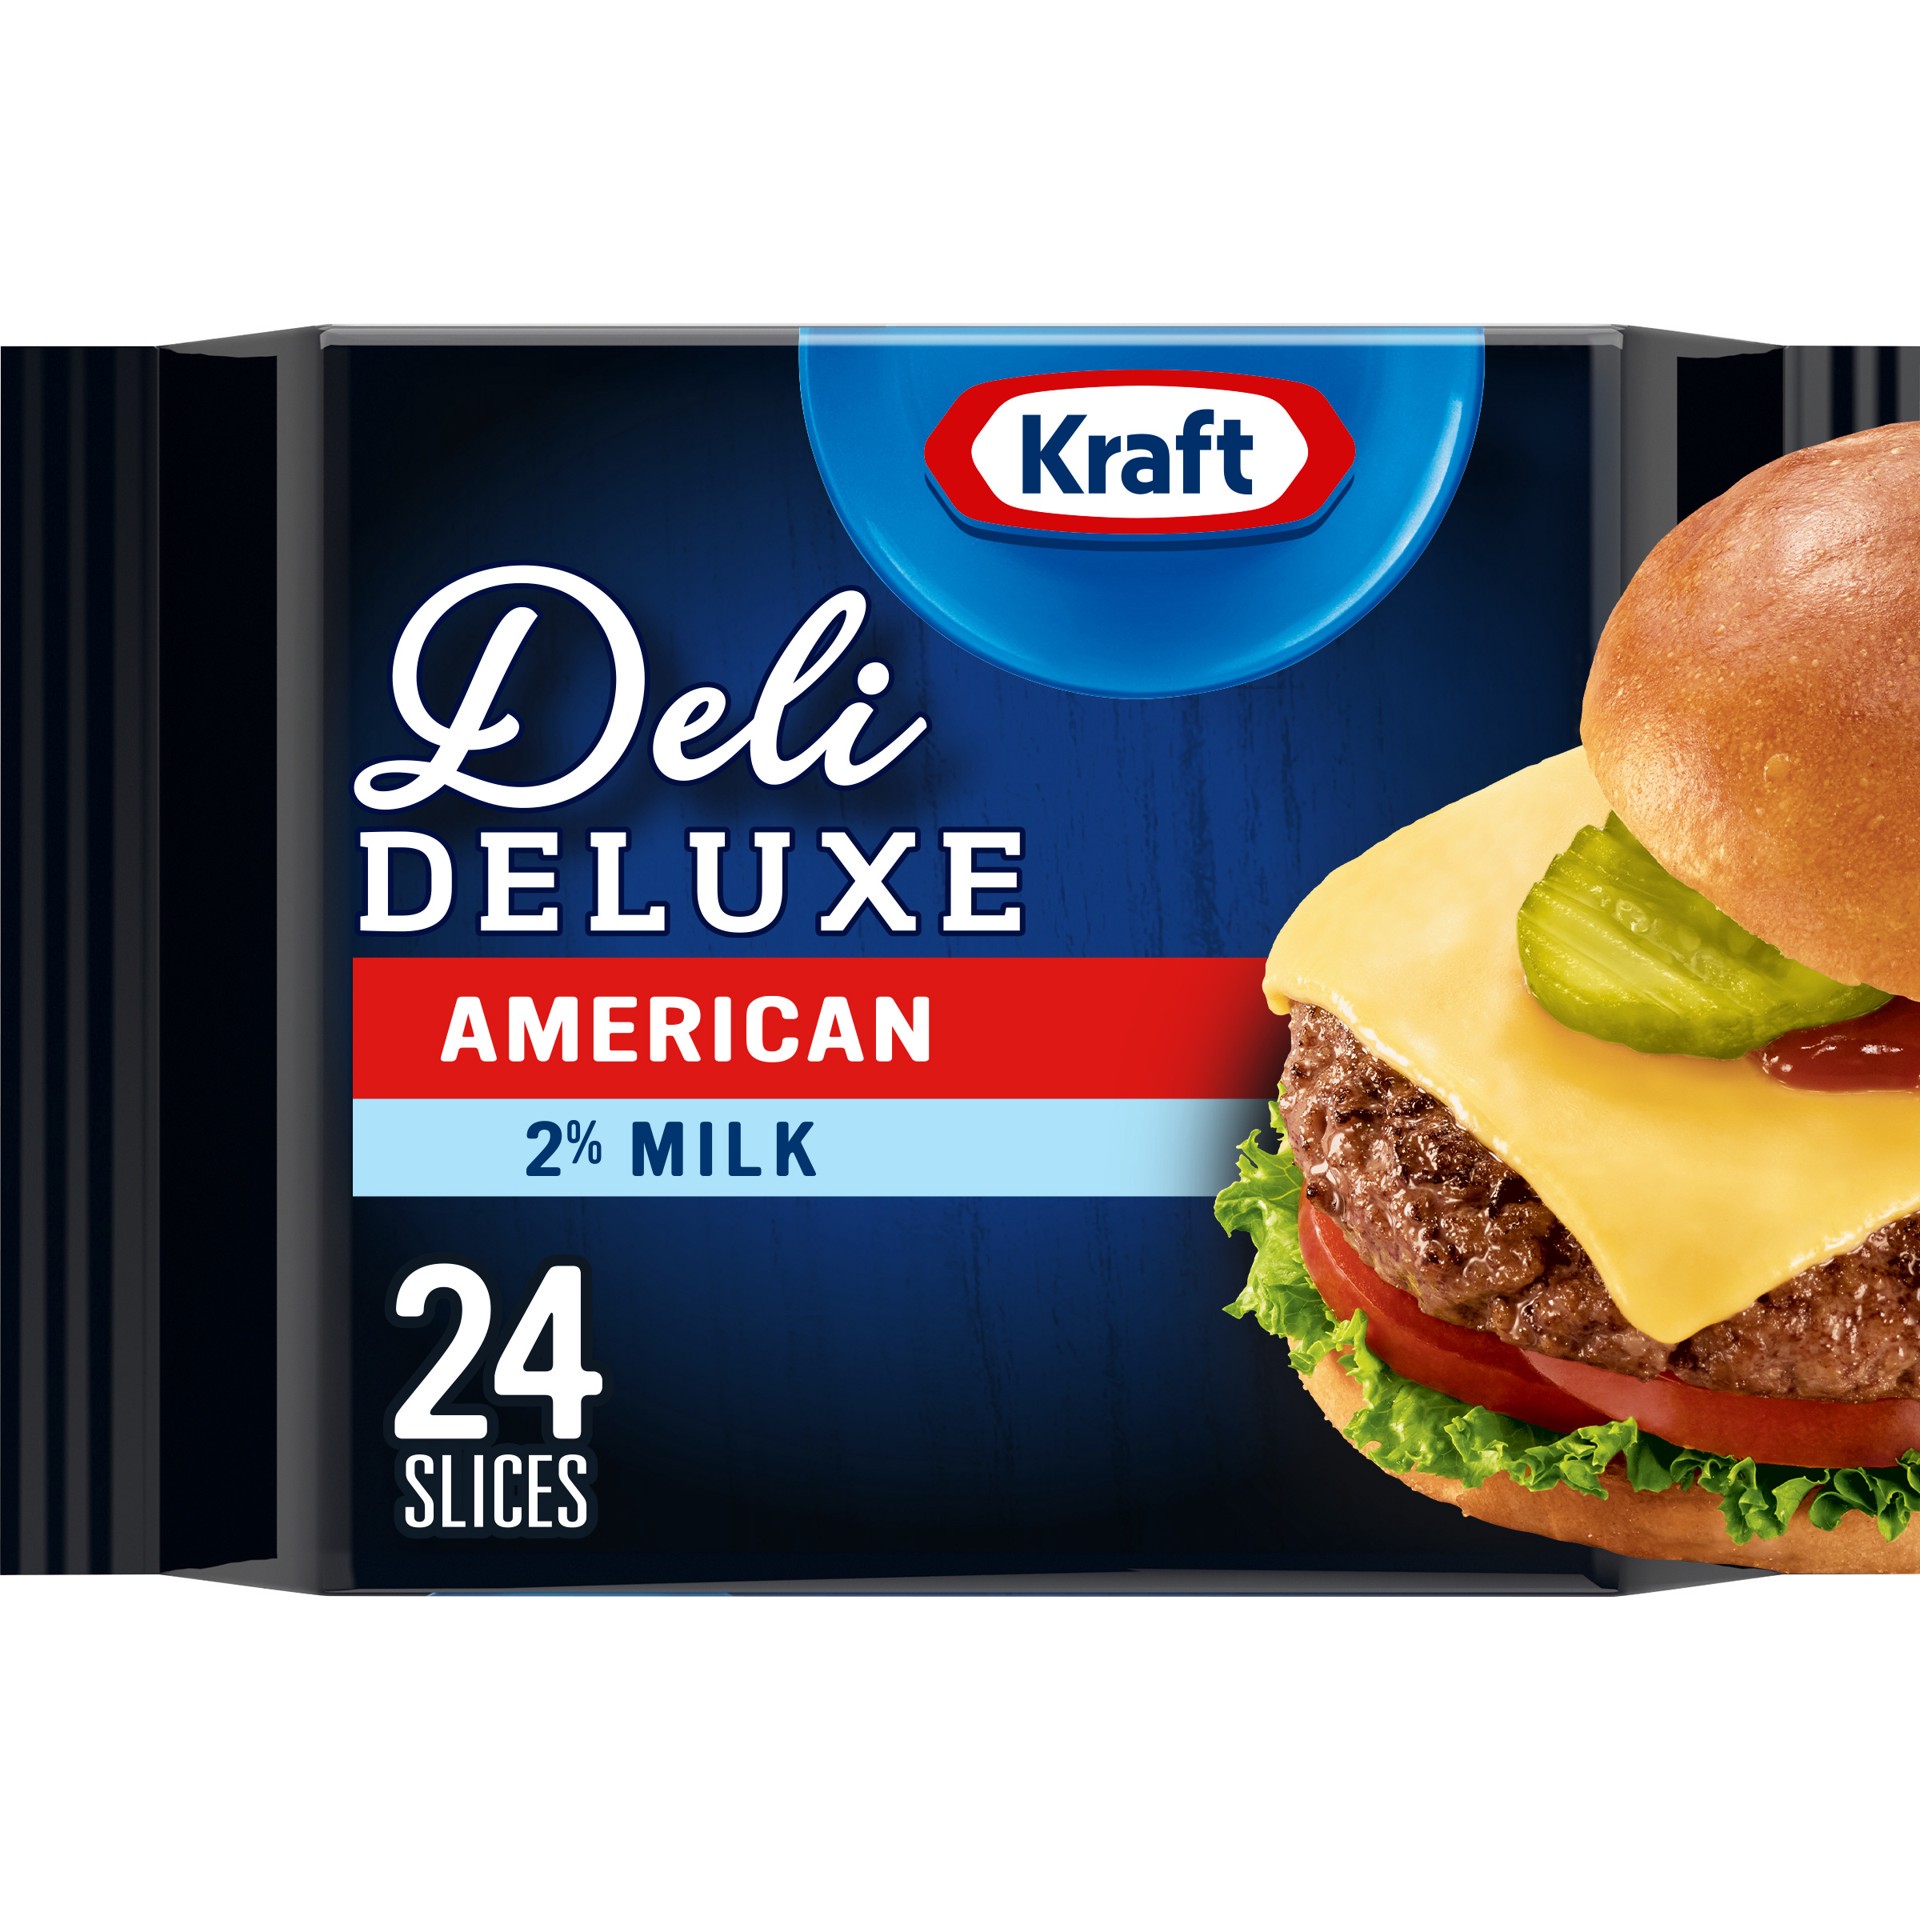 slide 1 of 6, Kraft Deli Deluxe American Cheese Slices with 2% Milk Pack, 16 oz